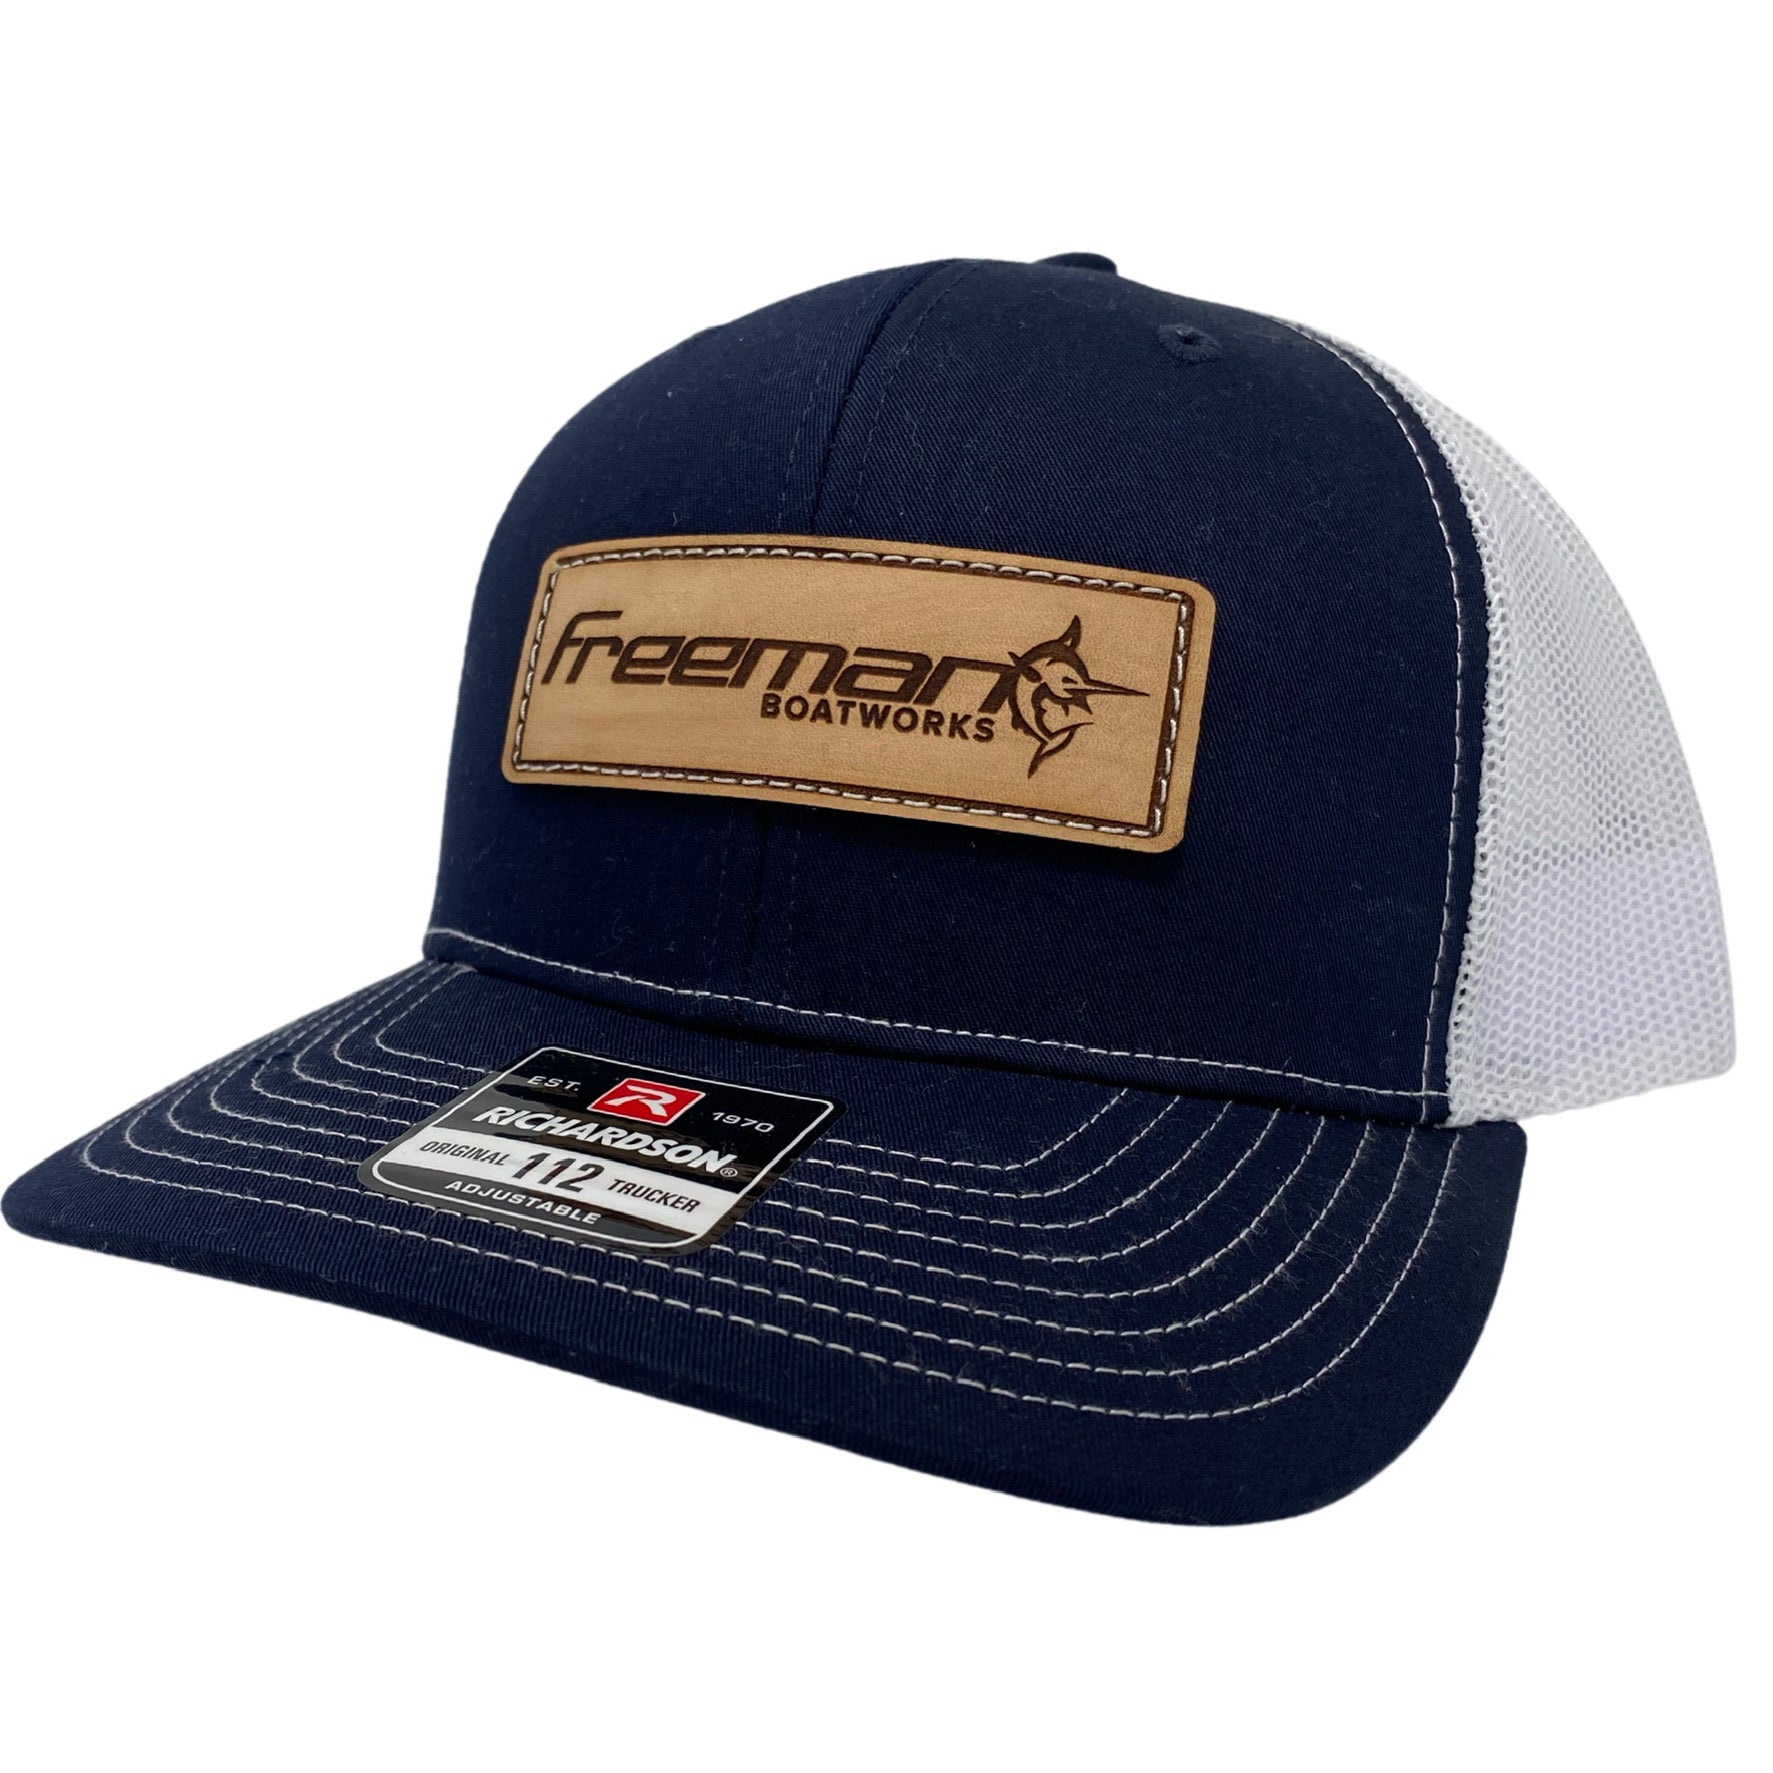 Freeman Boatworks – Tagged hats-visors– Boat Builders Trading Company